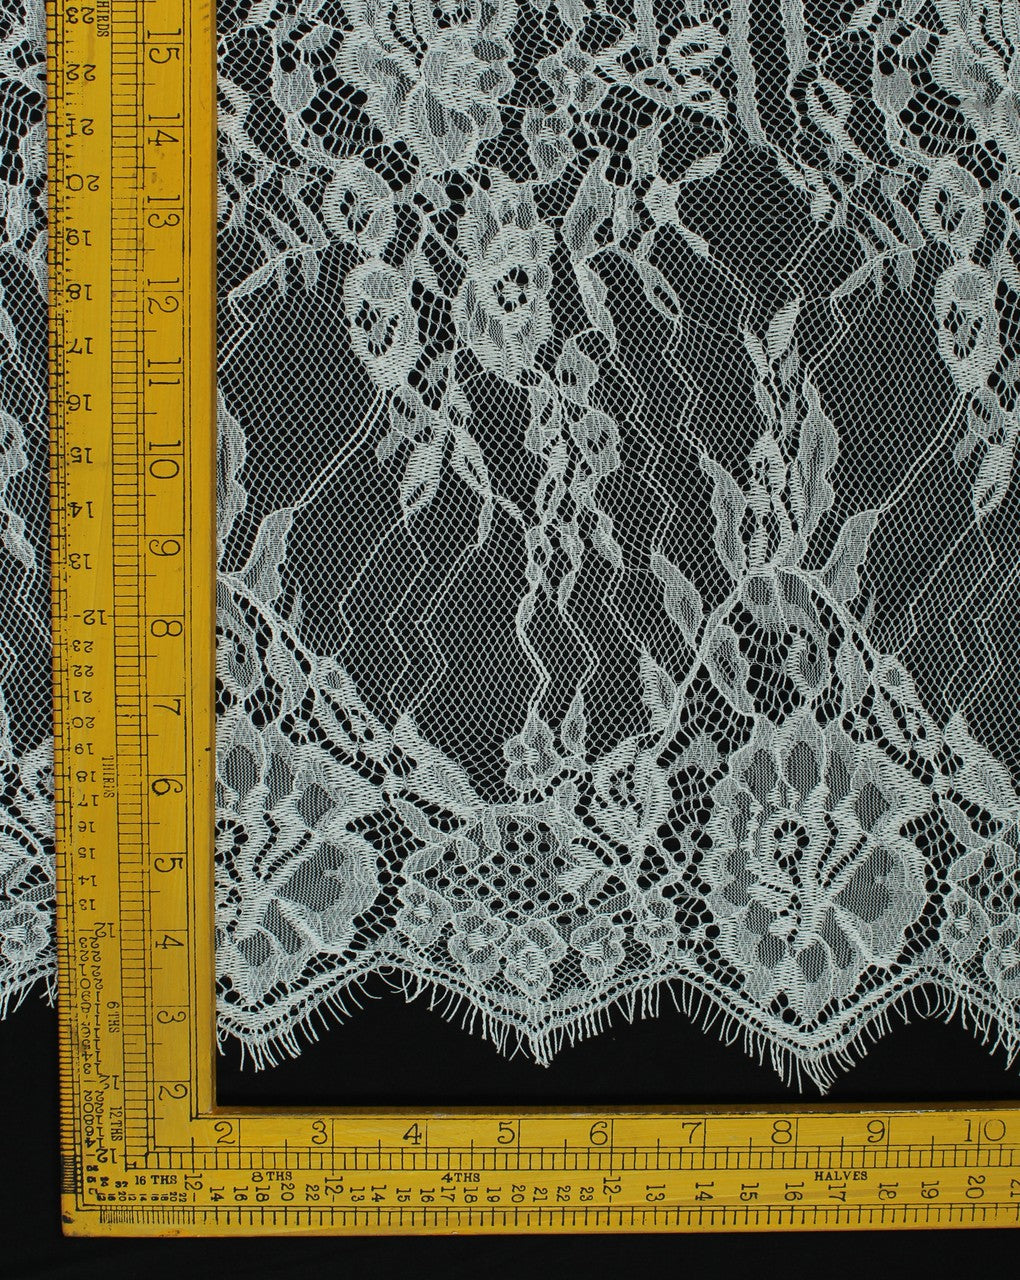 Polyester Abstract Design 16 Lace Cut Work Fabric (RFD)